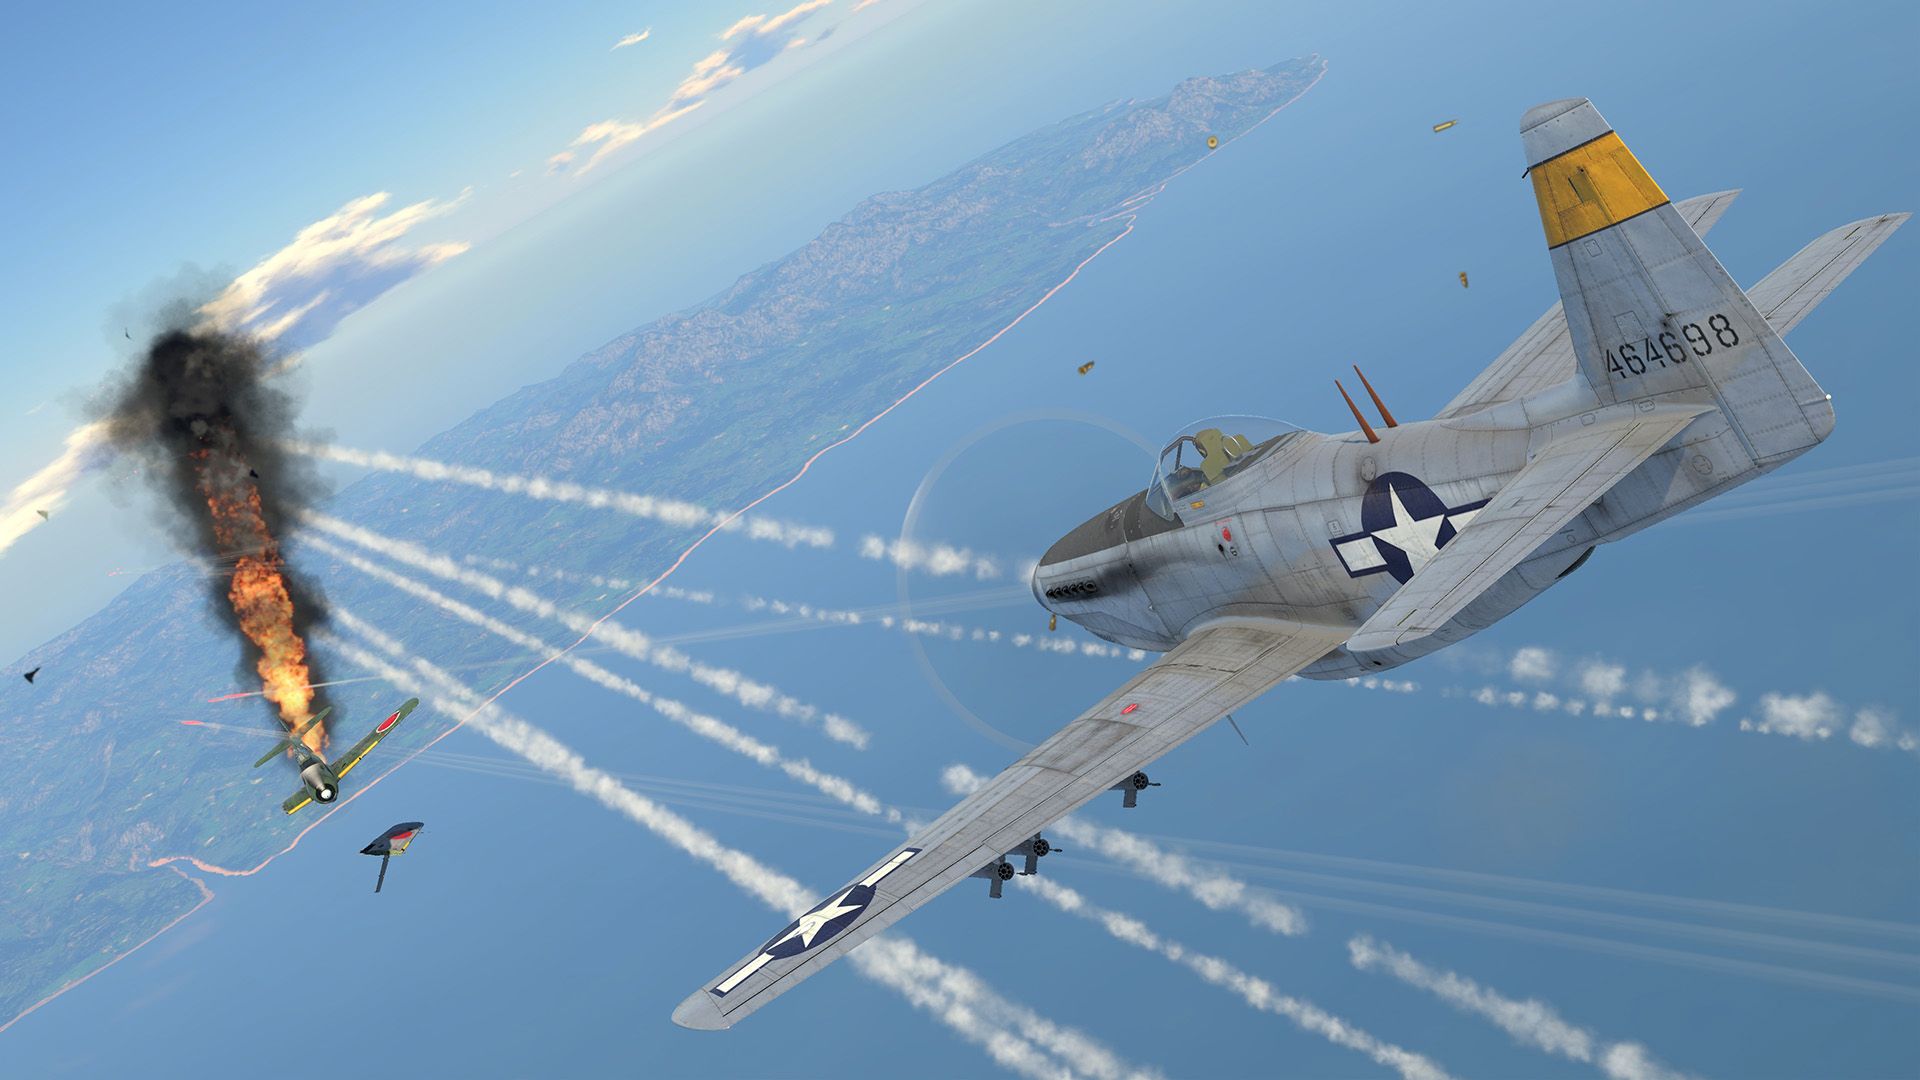 War Thunder Founder Packs Available Now on Xbox One